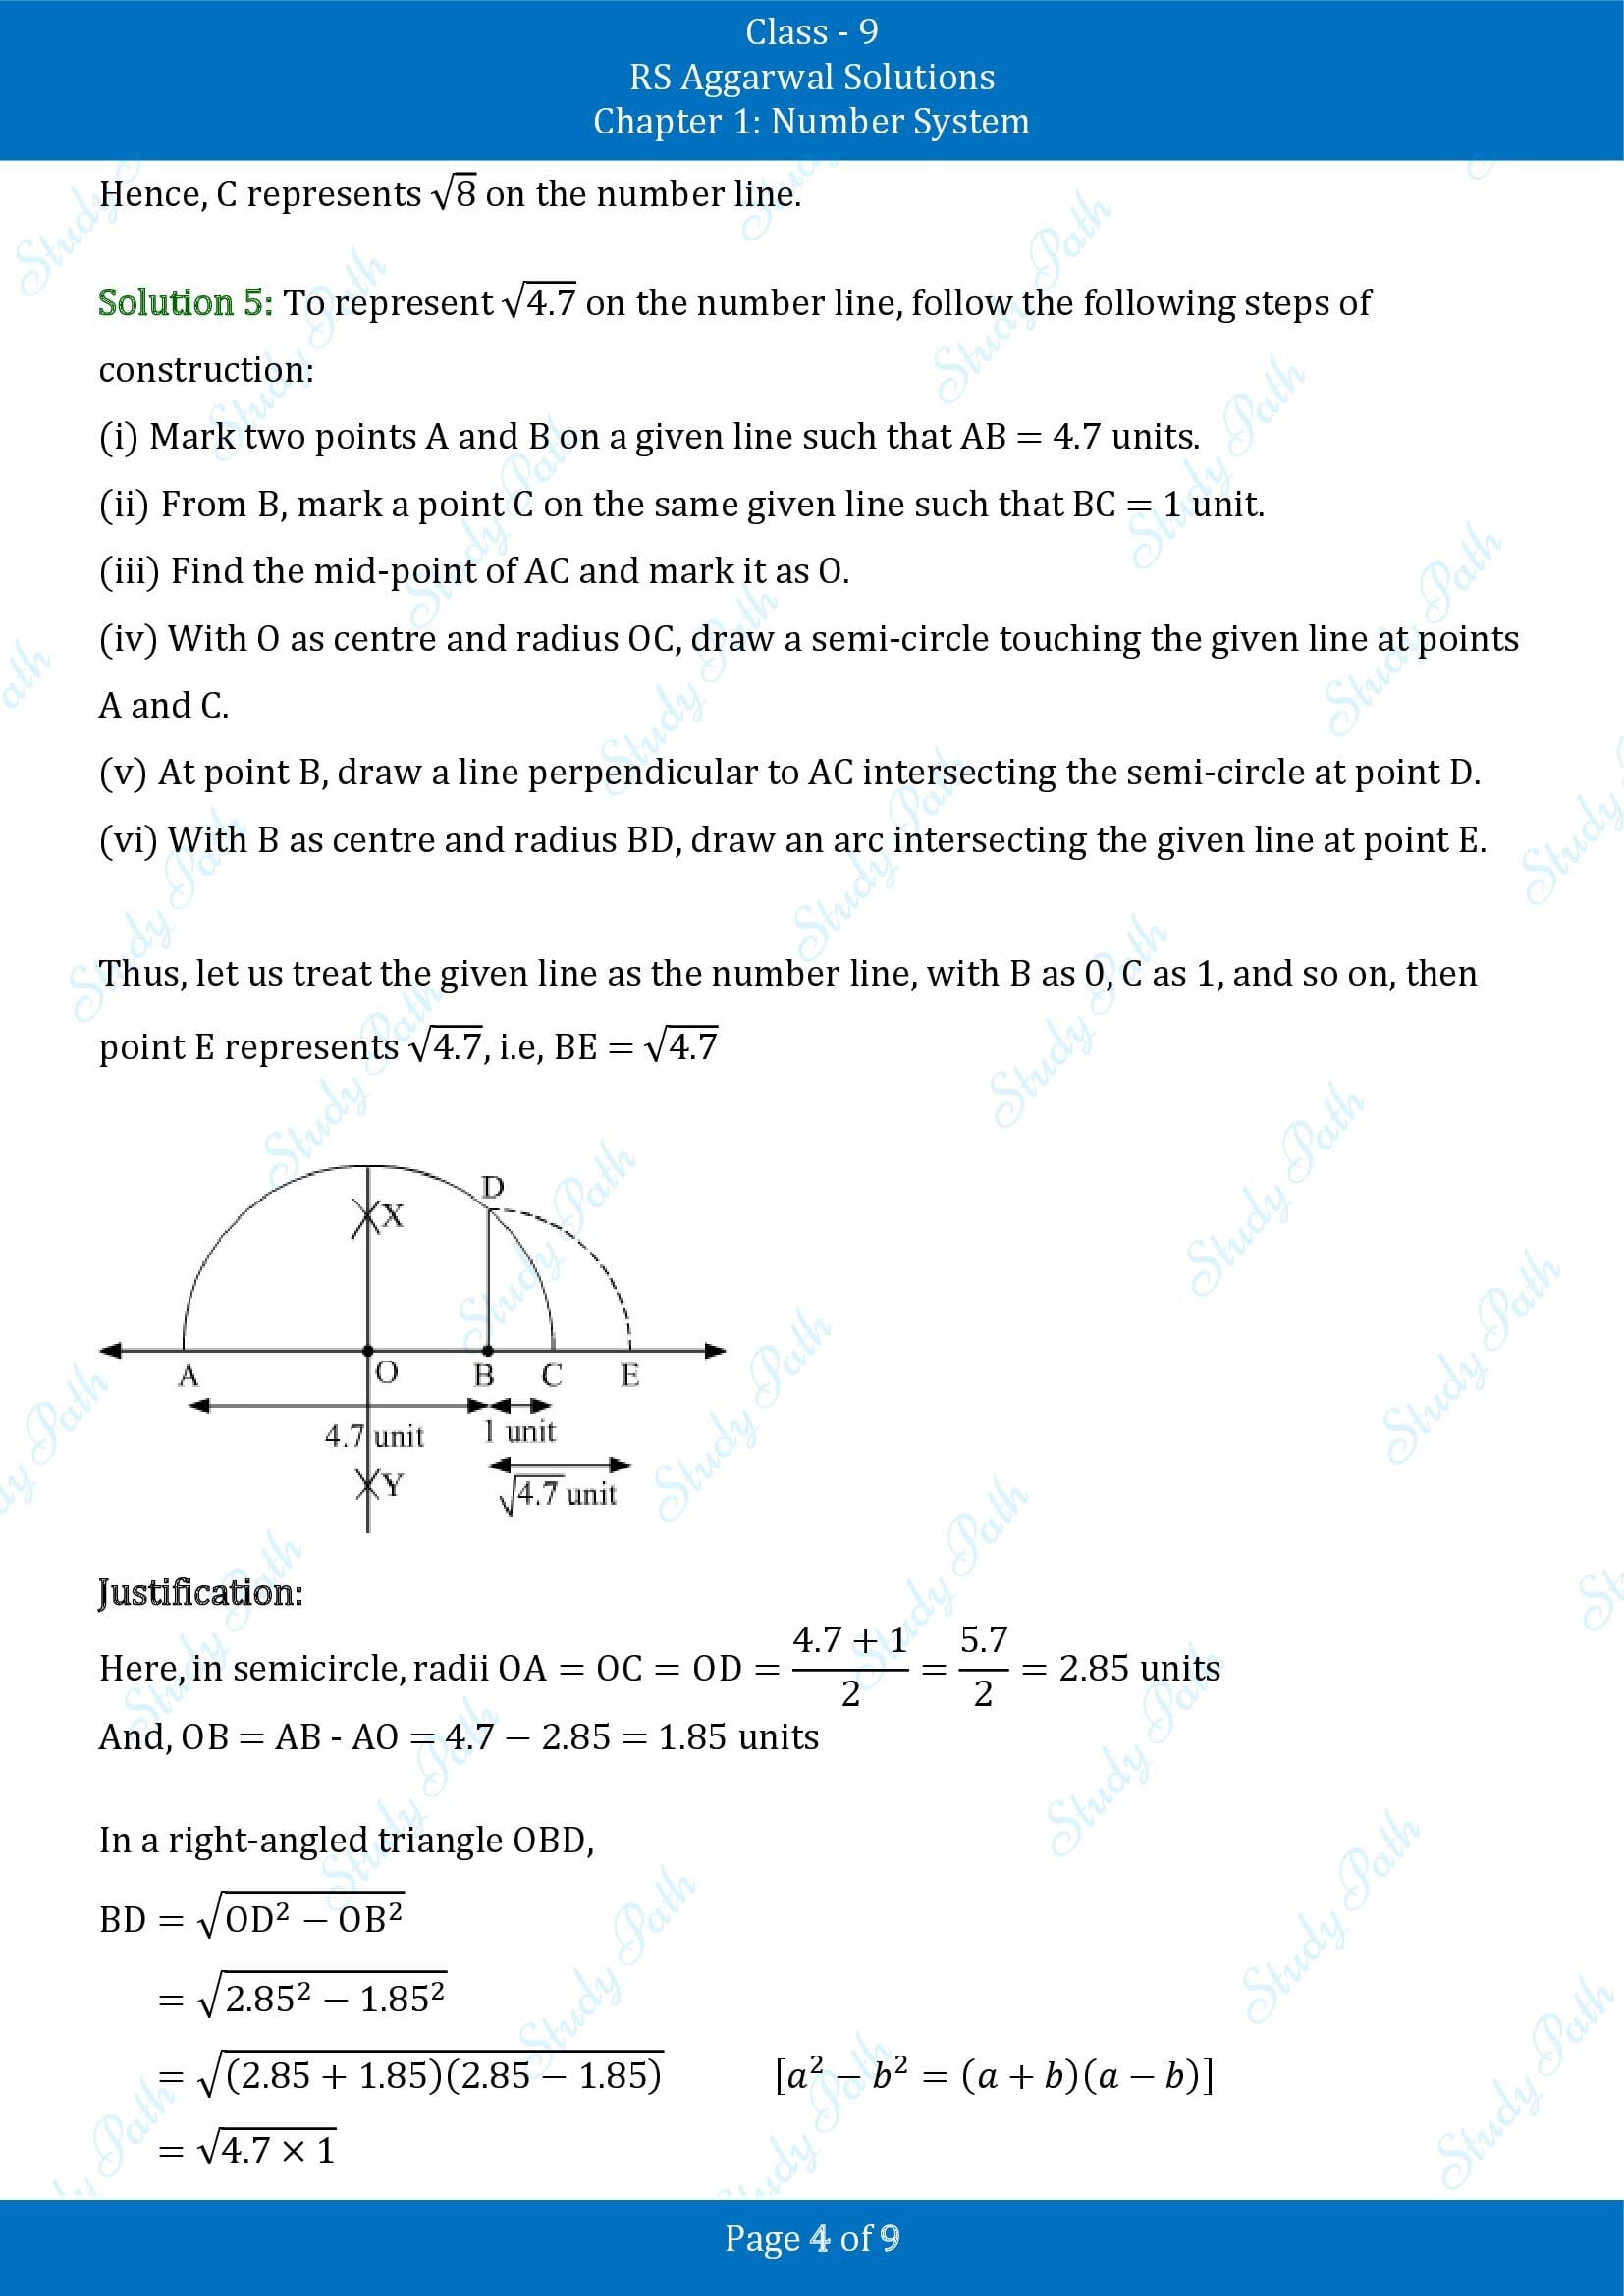 RS Aggarwal Solutions Class 9 Chapter 1 Number System Exercise 1E 00004